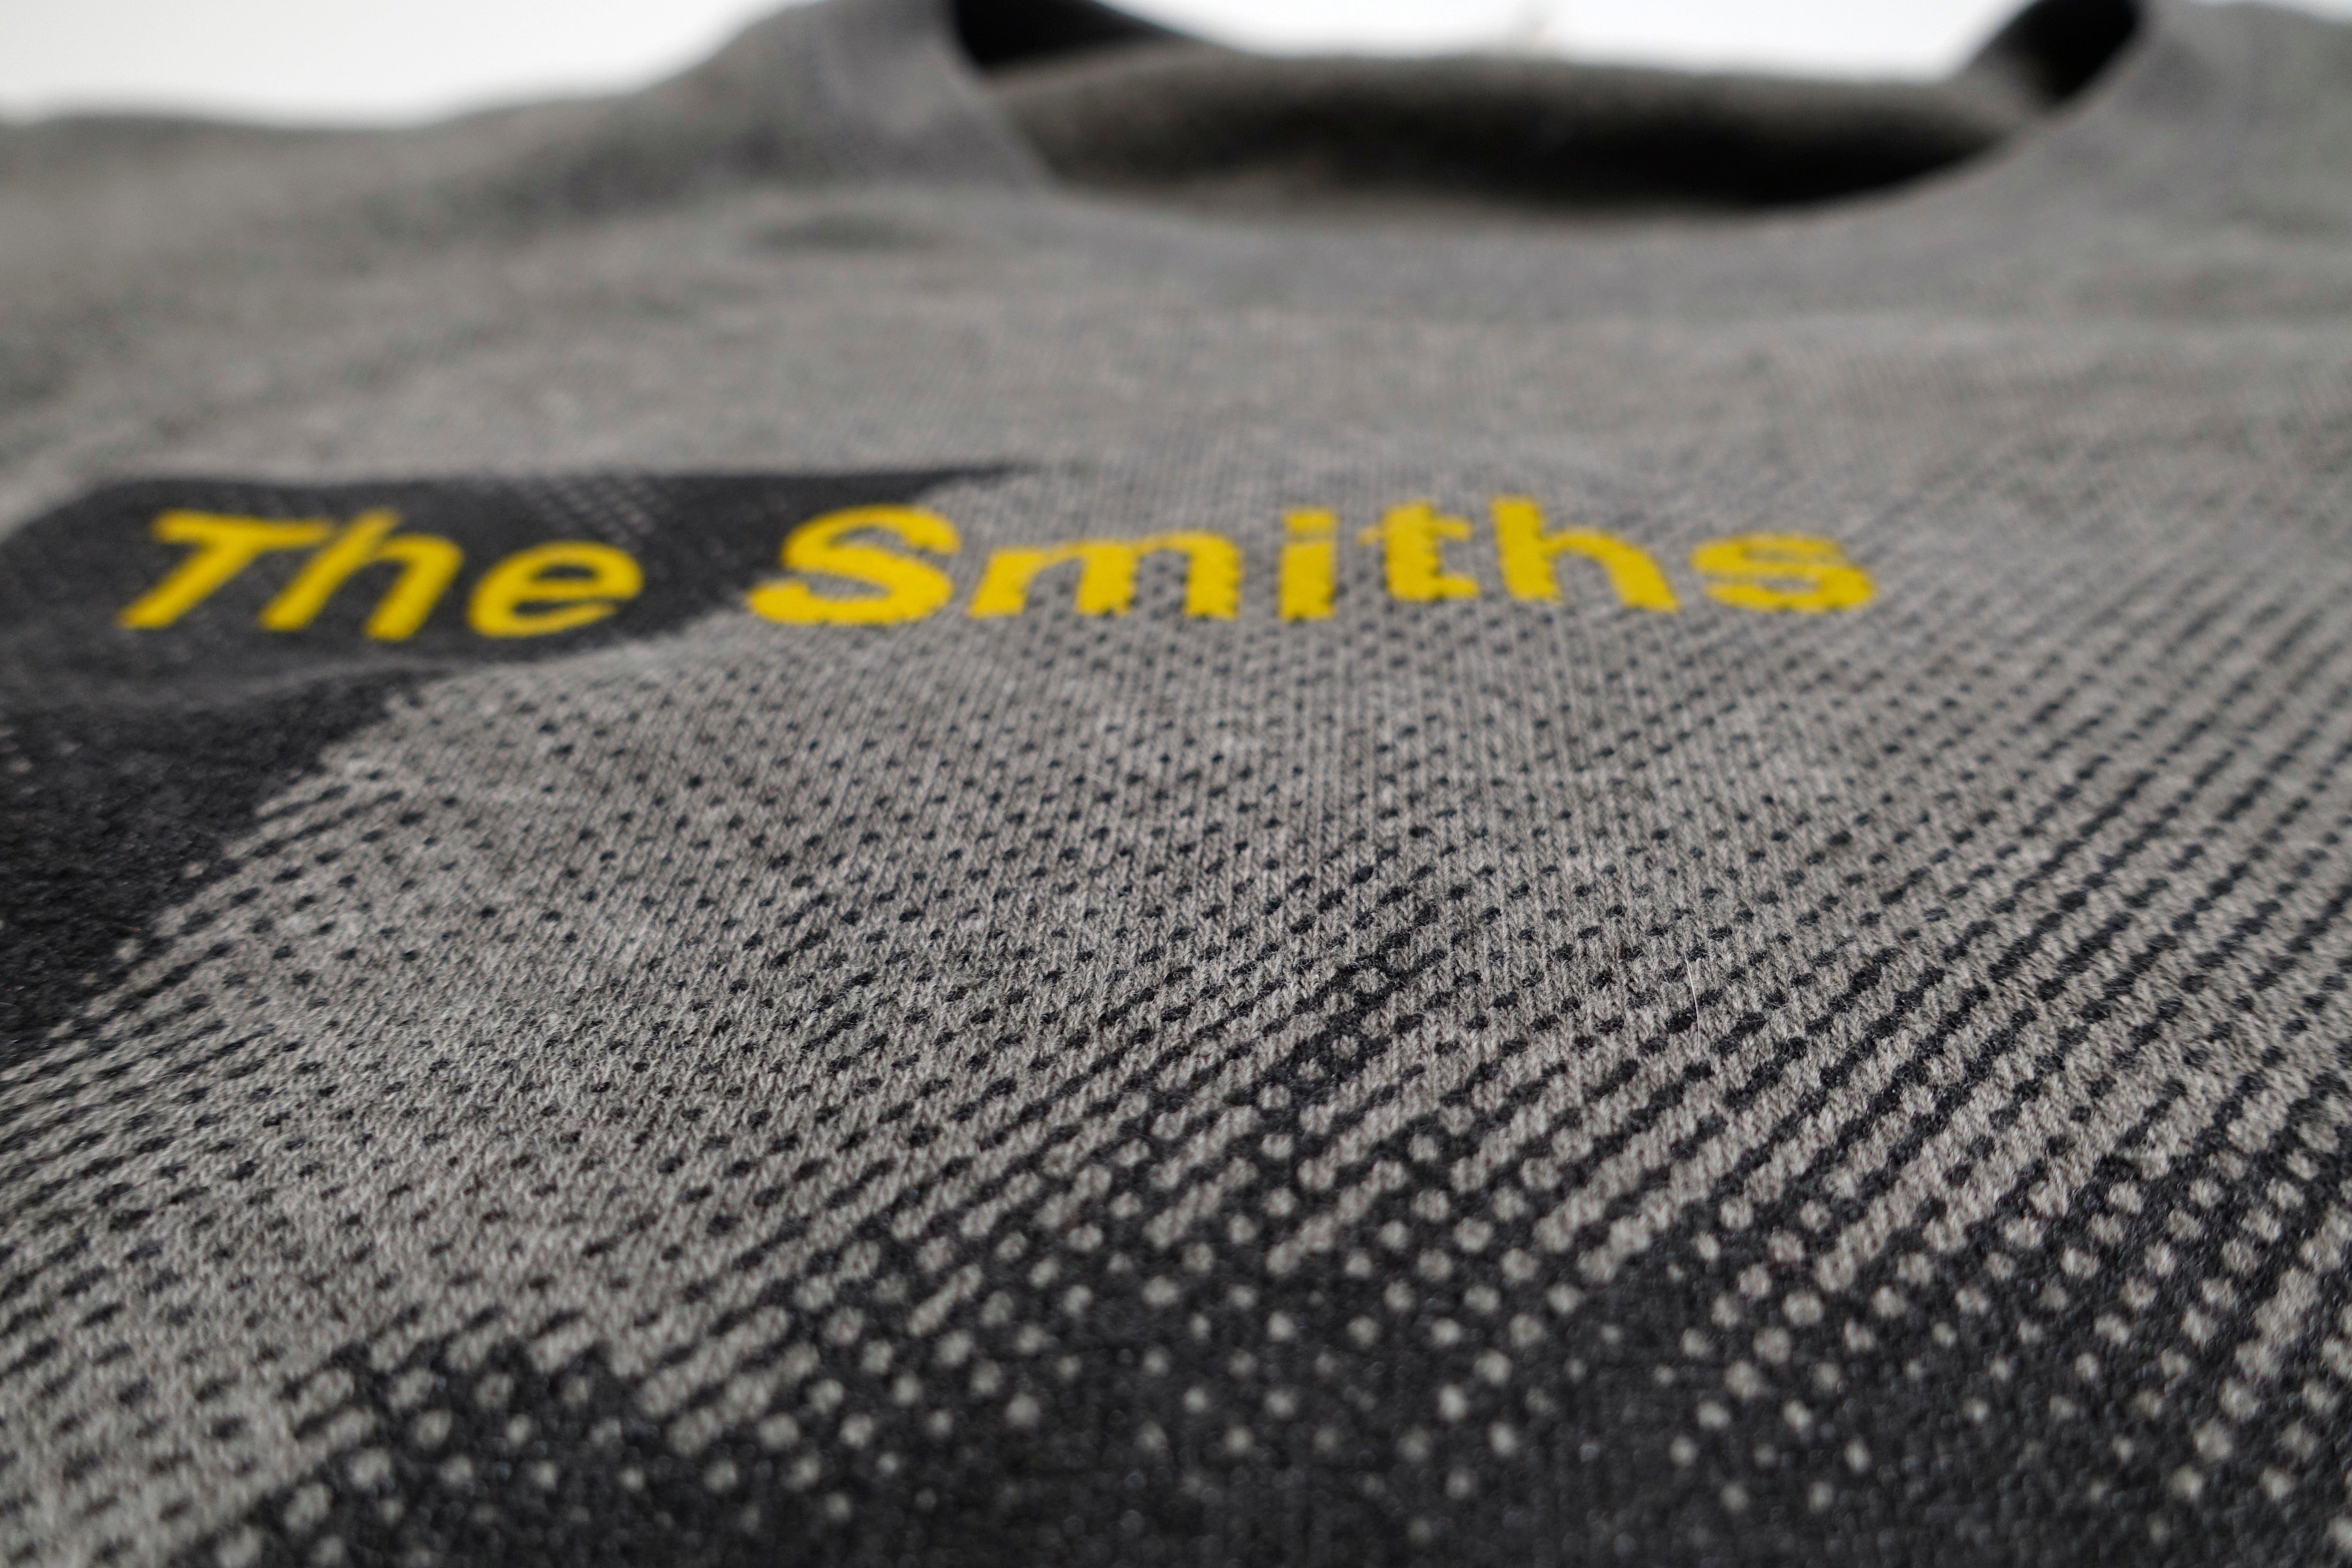 the Smiths - Heaven Knows I'm Miserable Now Sweat Shirt (Bootleg by Me) Size XL